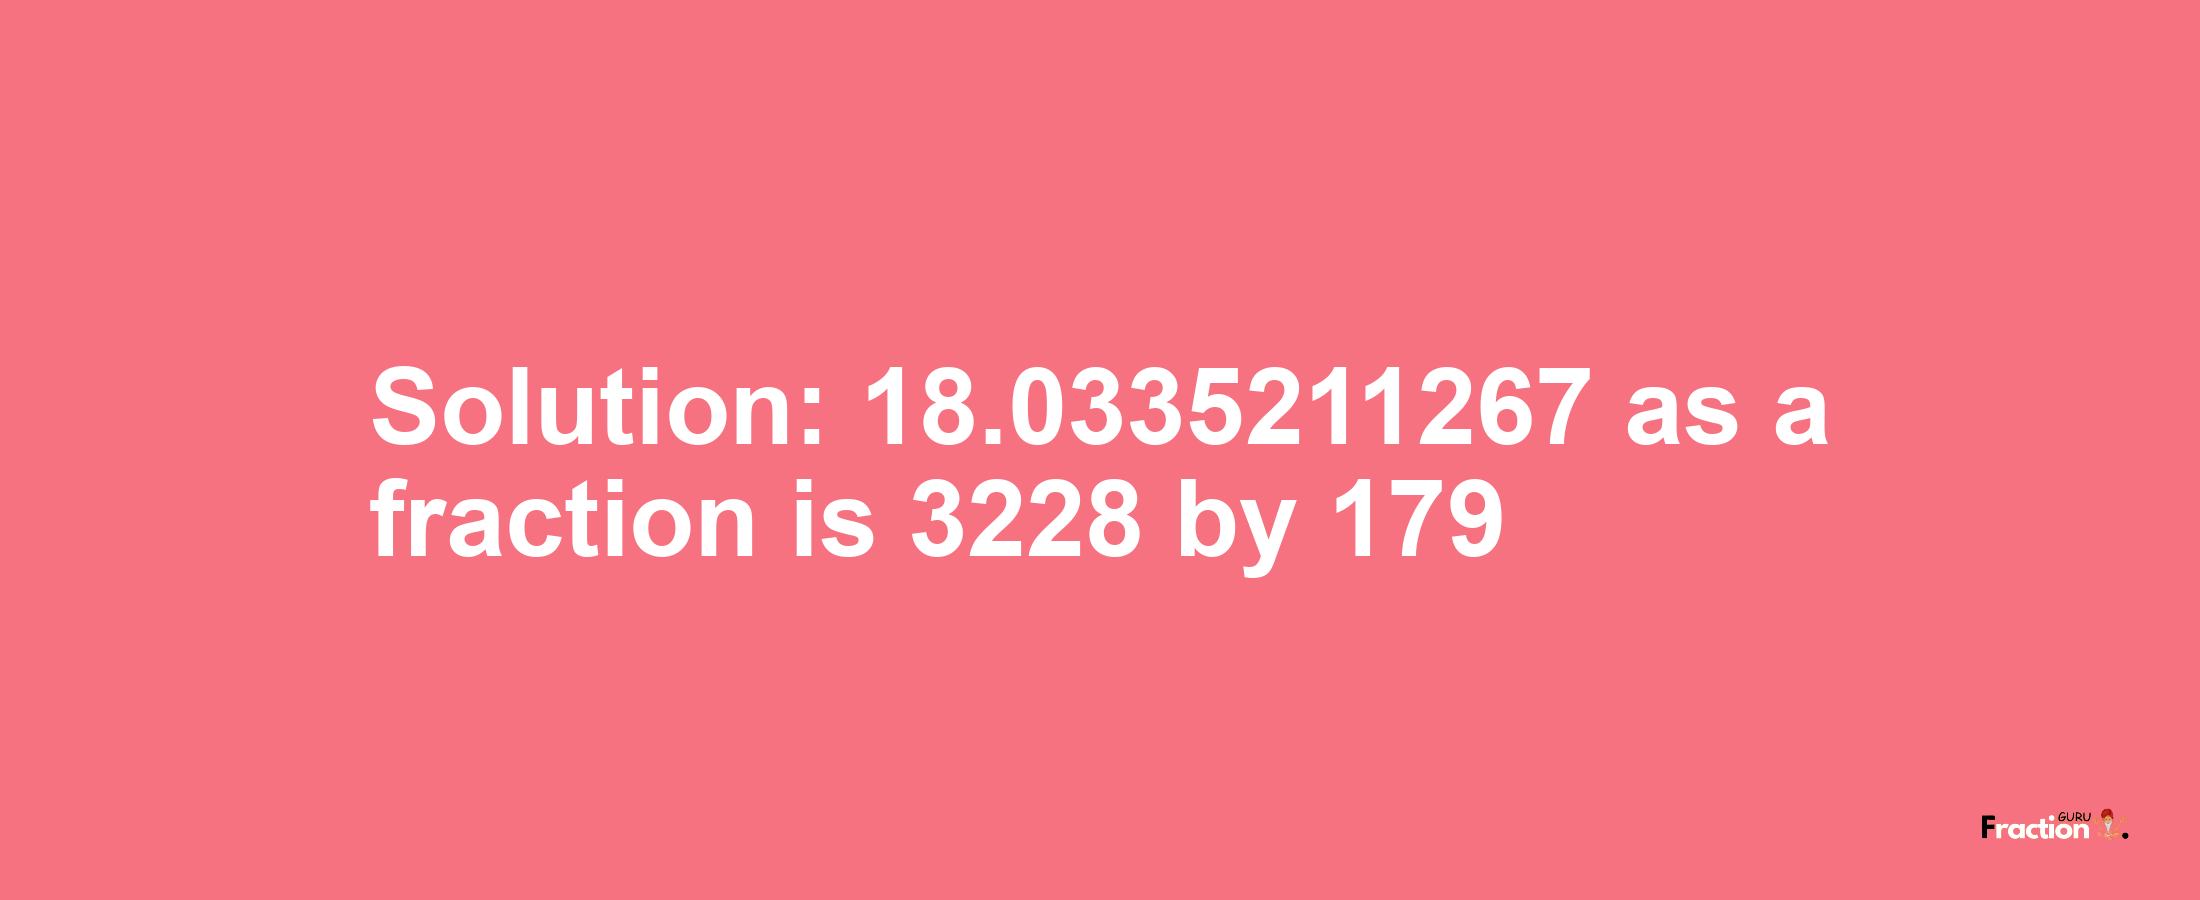 Solution:18.0335211267 as a fraction is 3228/179